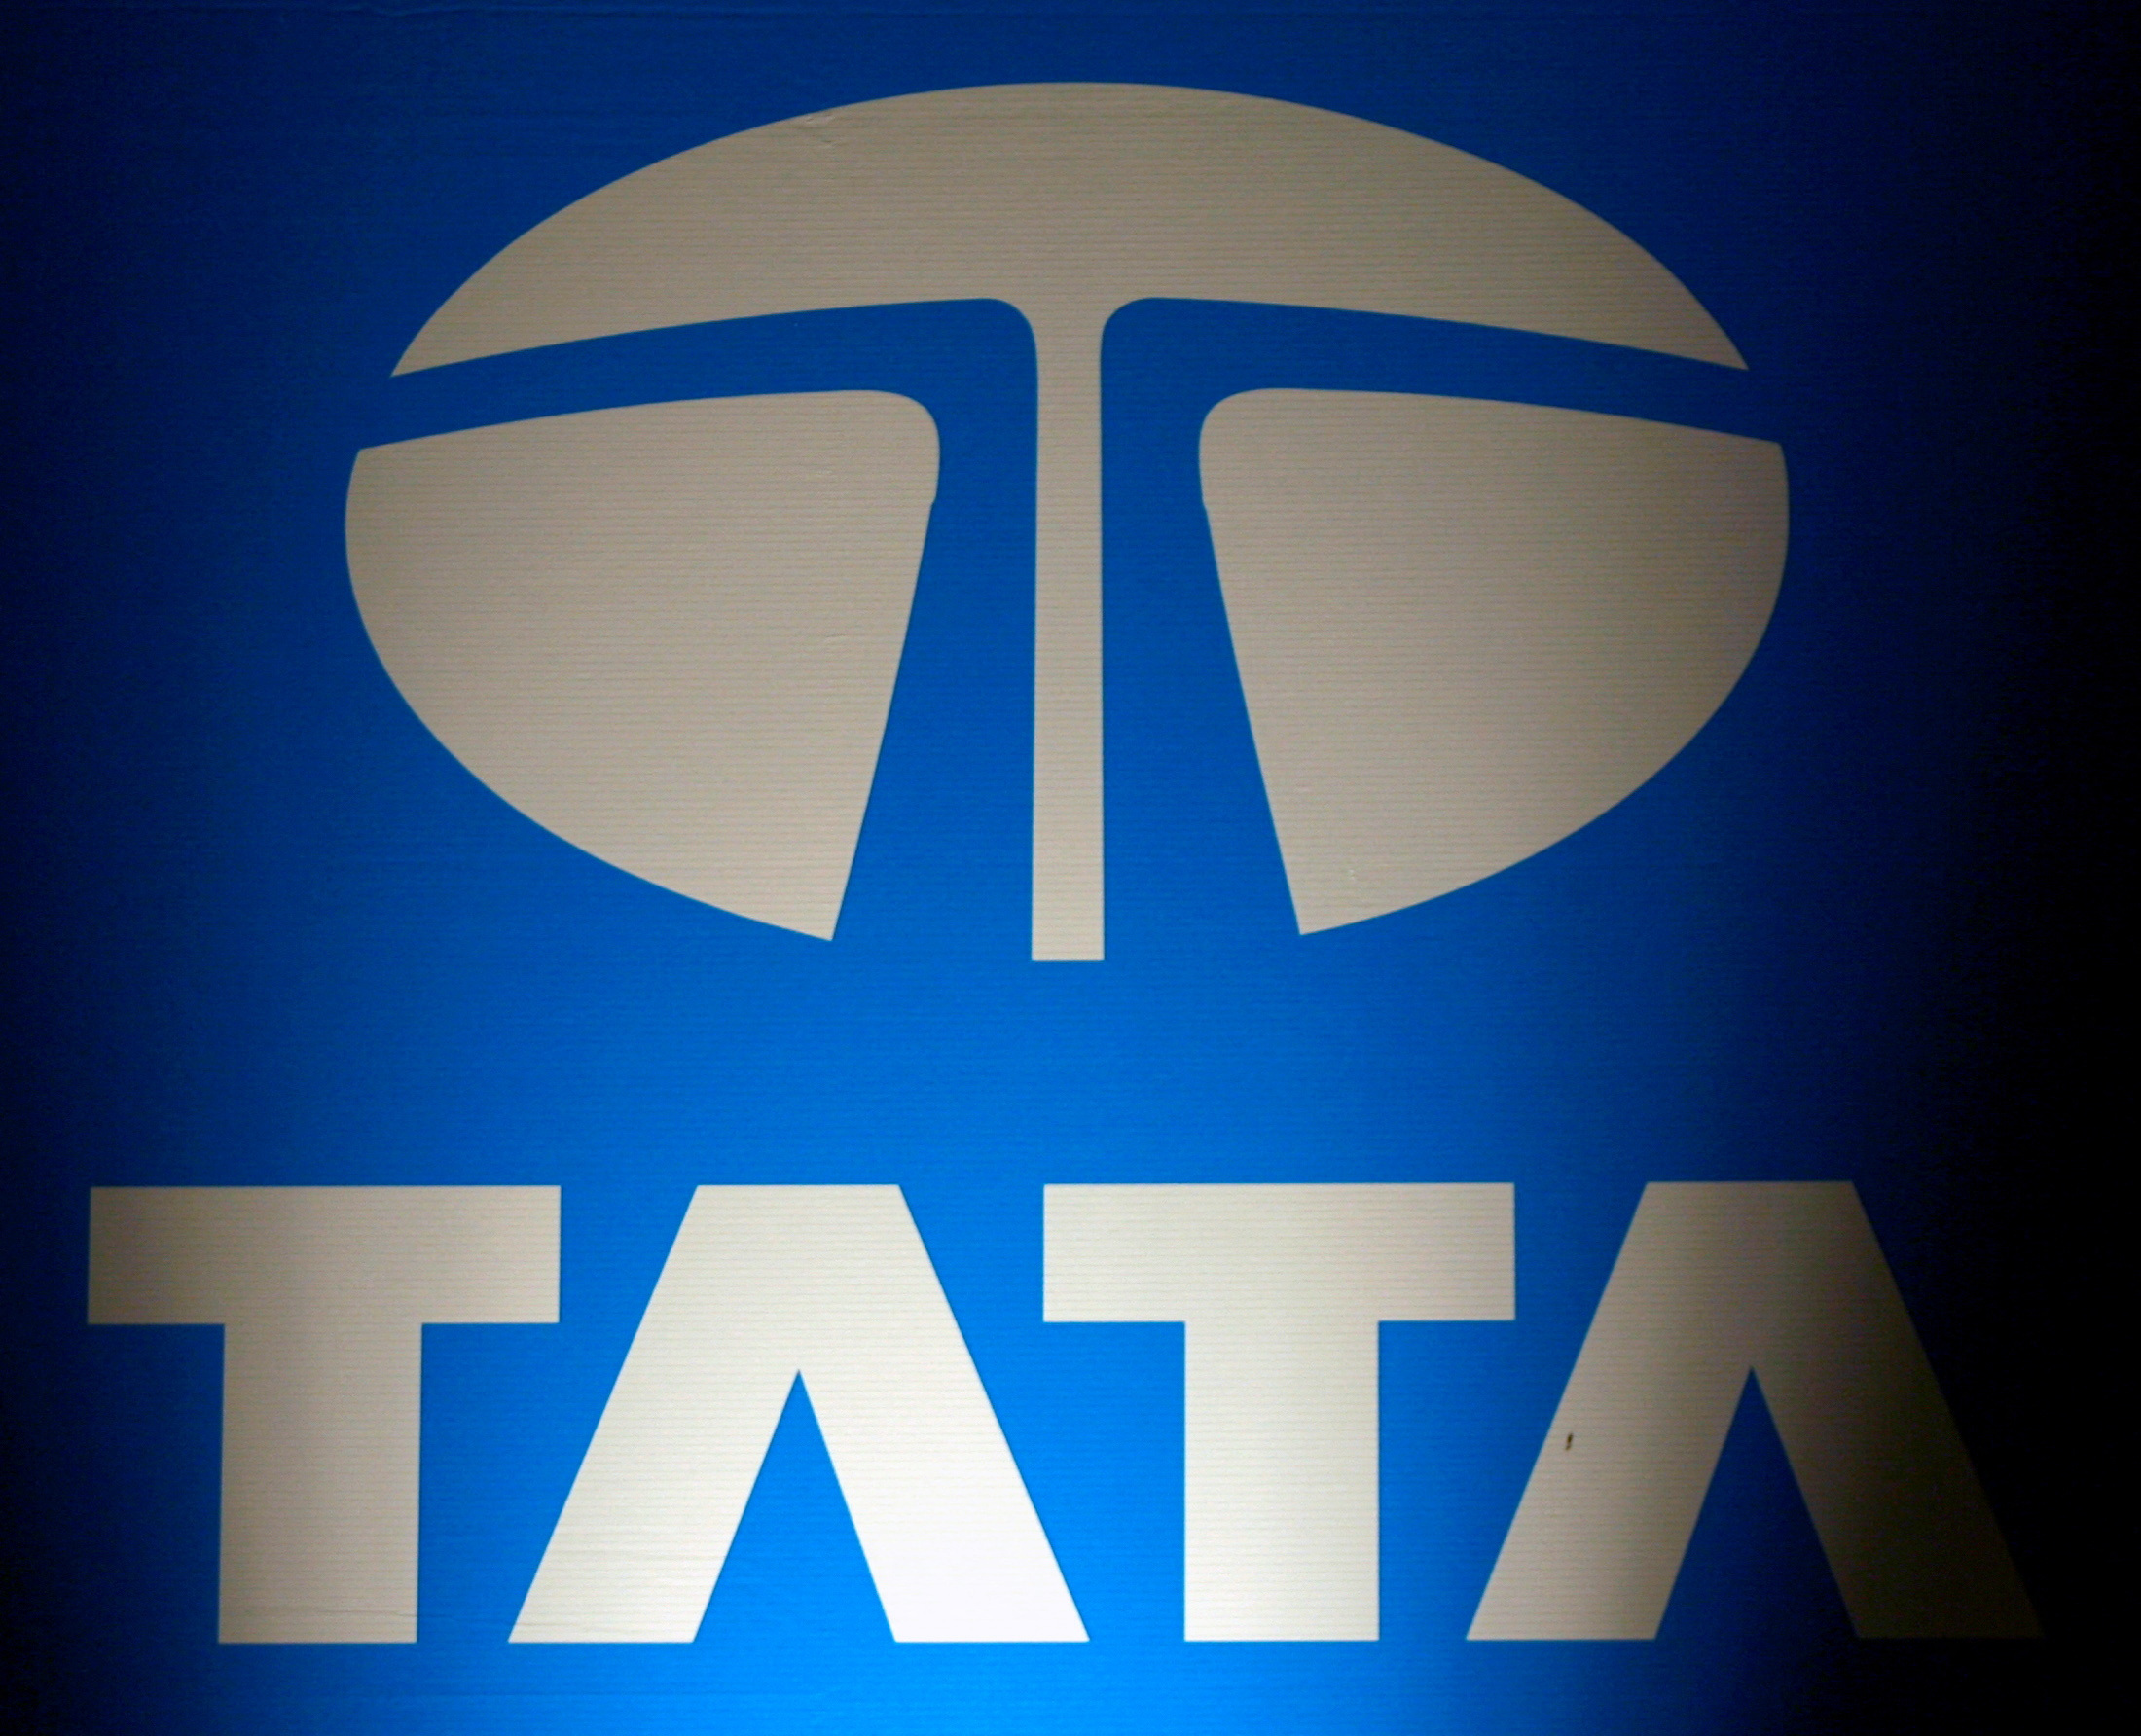 Logo of Tata Group is seen at a business meeting in New Delhi